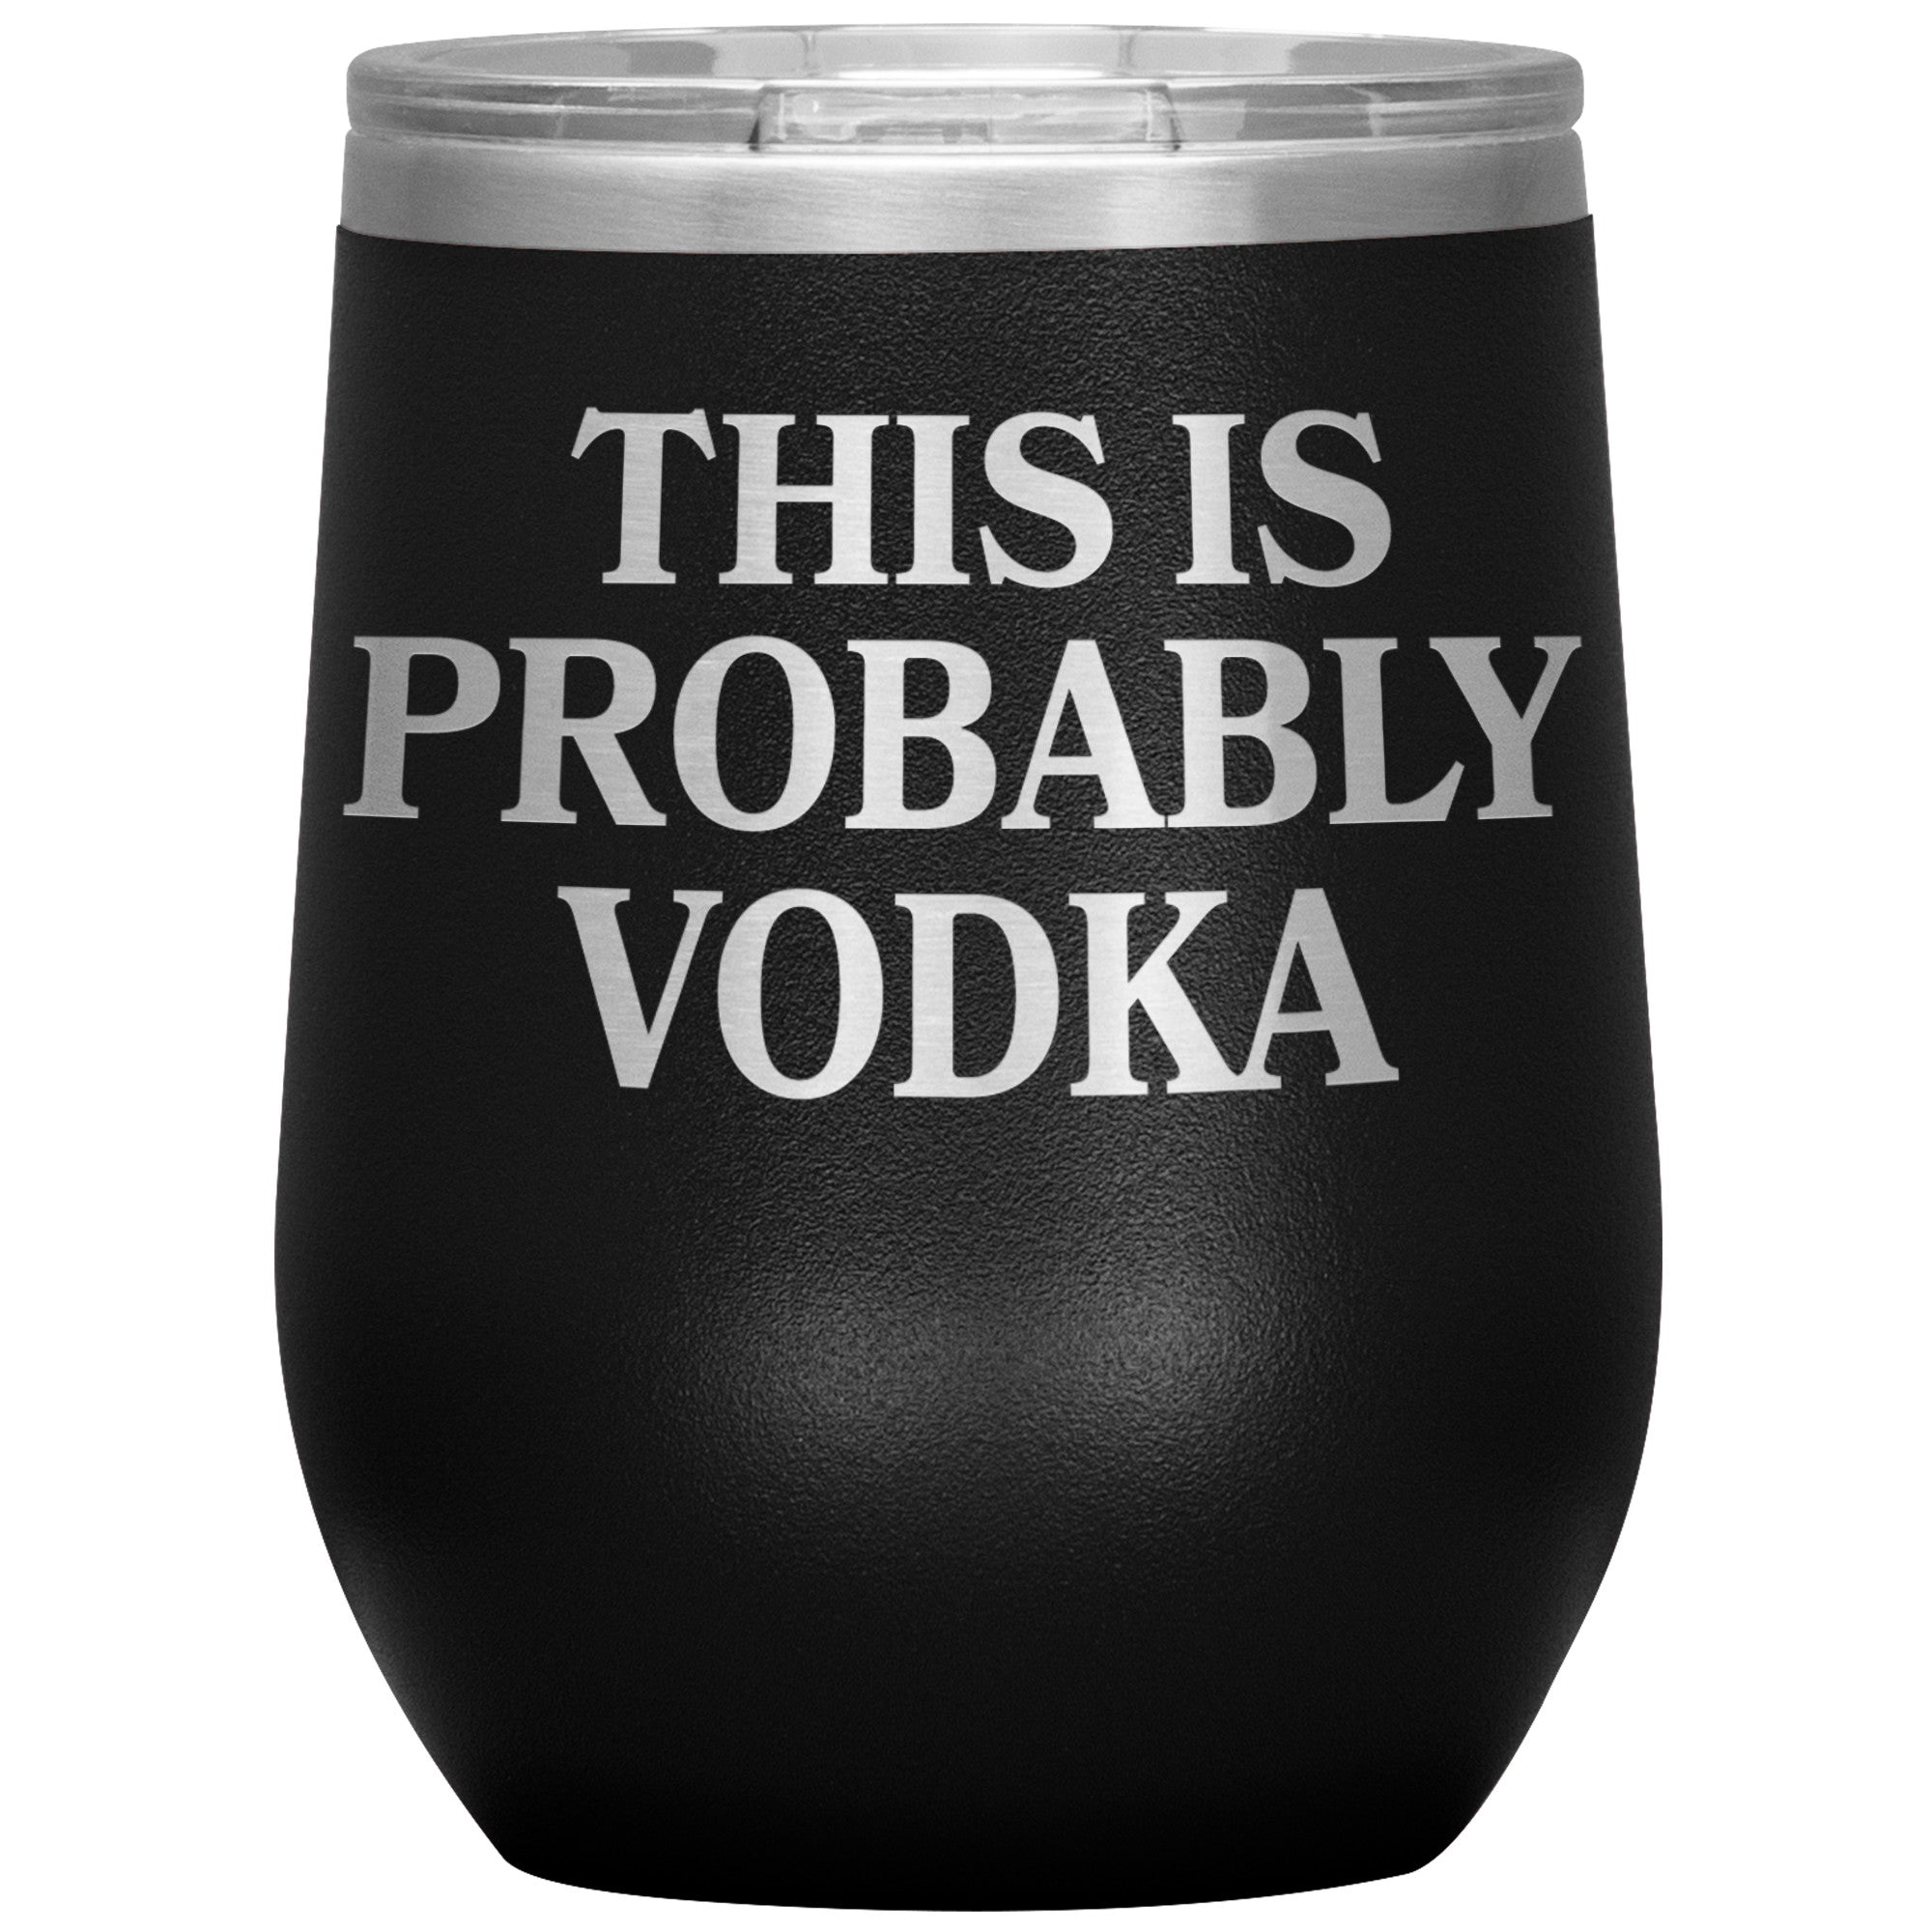 This Is Probably Vodka Insulated Wine Tumbler Tumblers teelaunch Black  